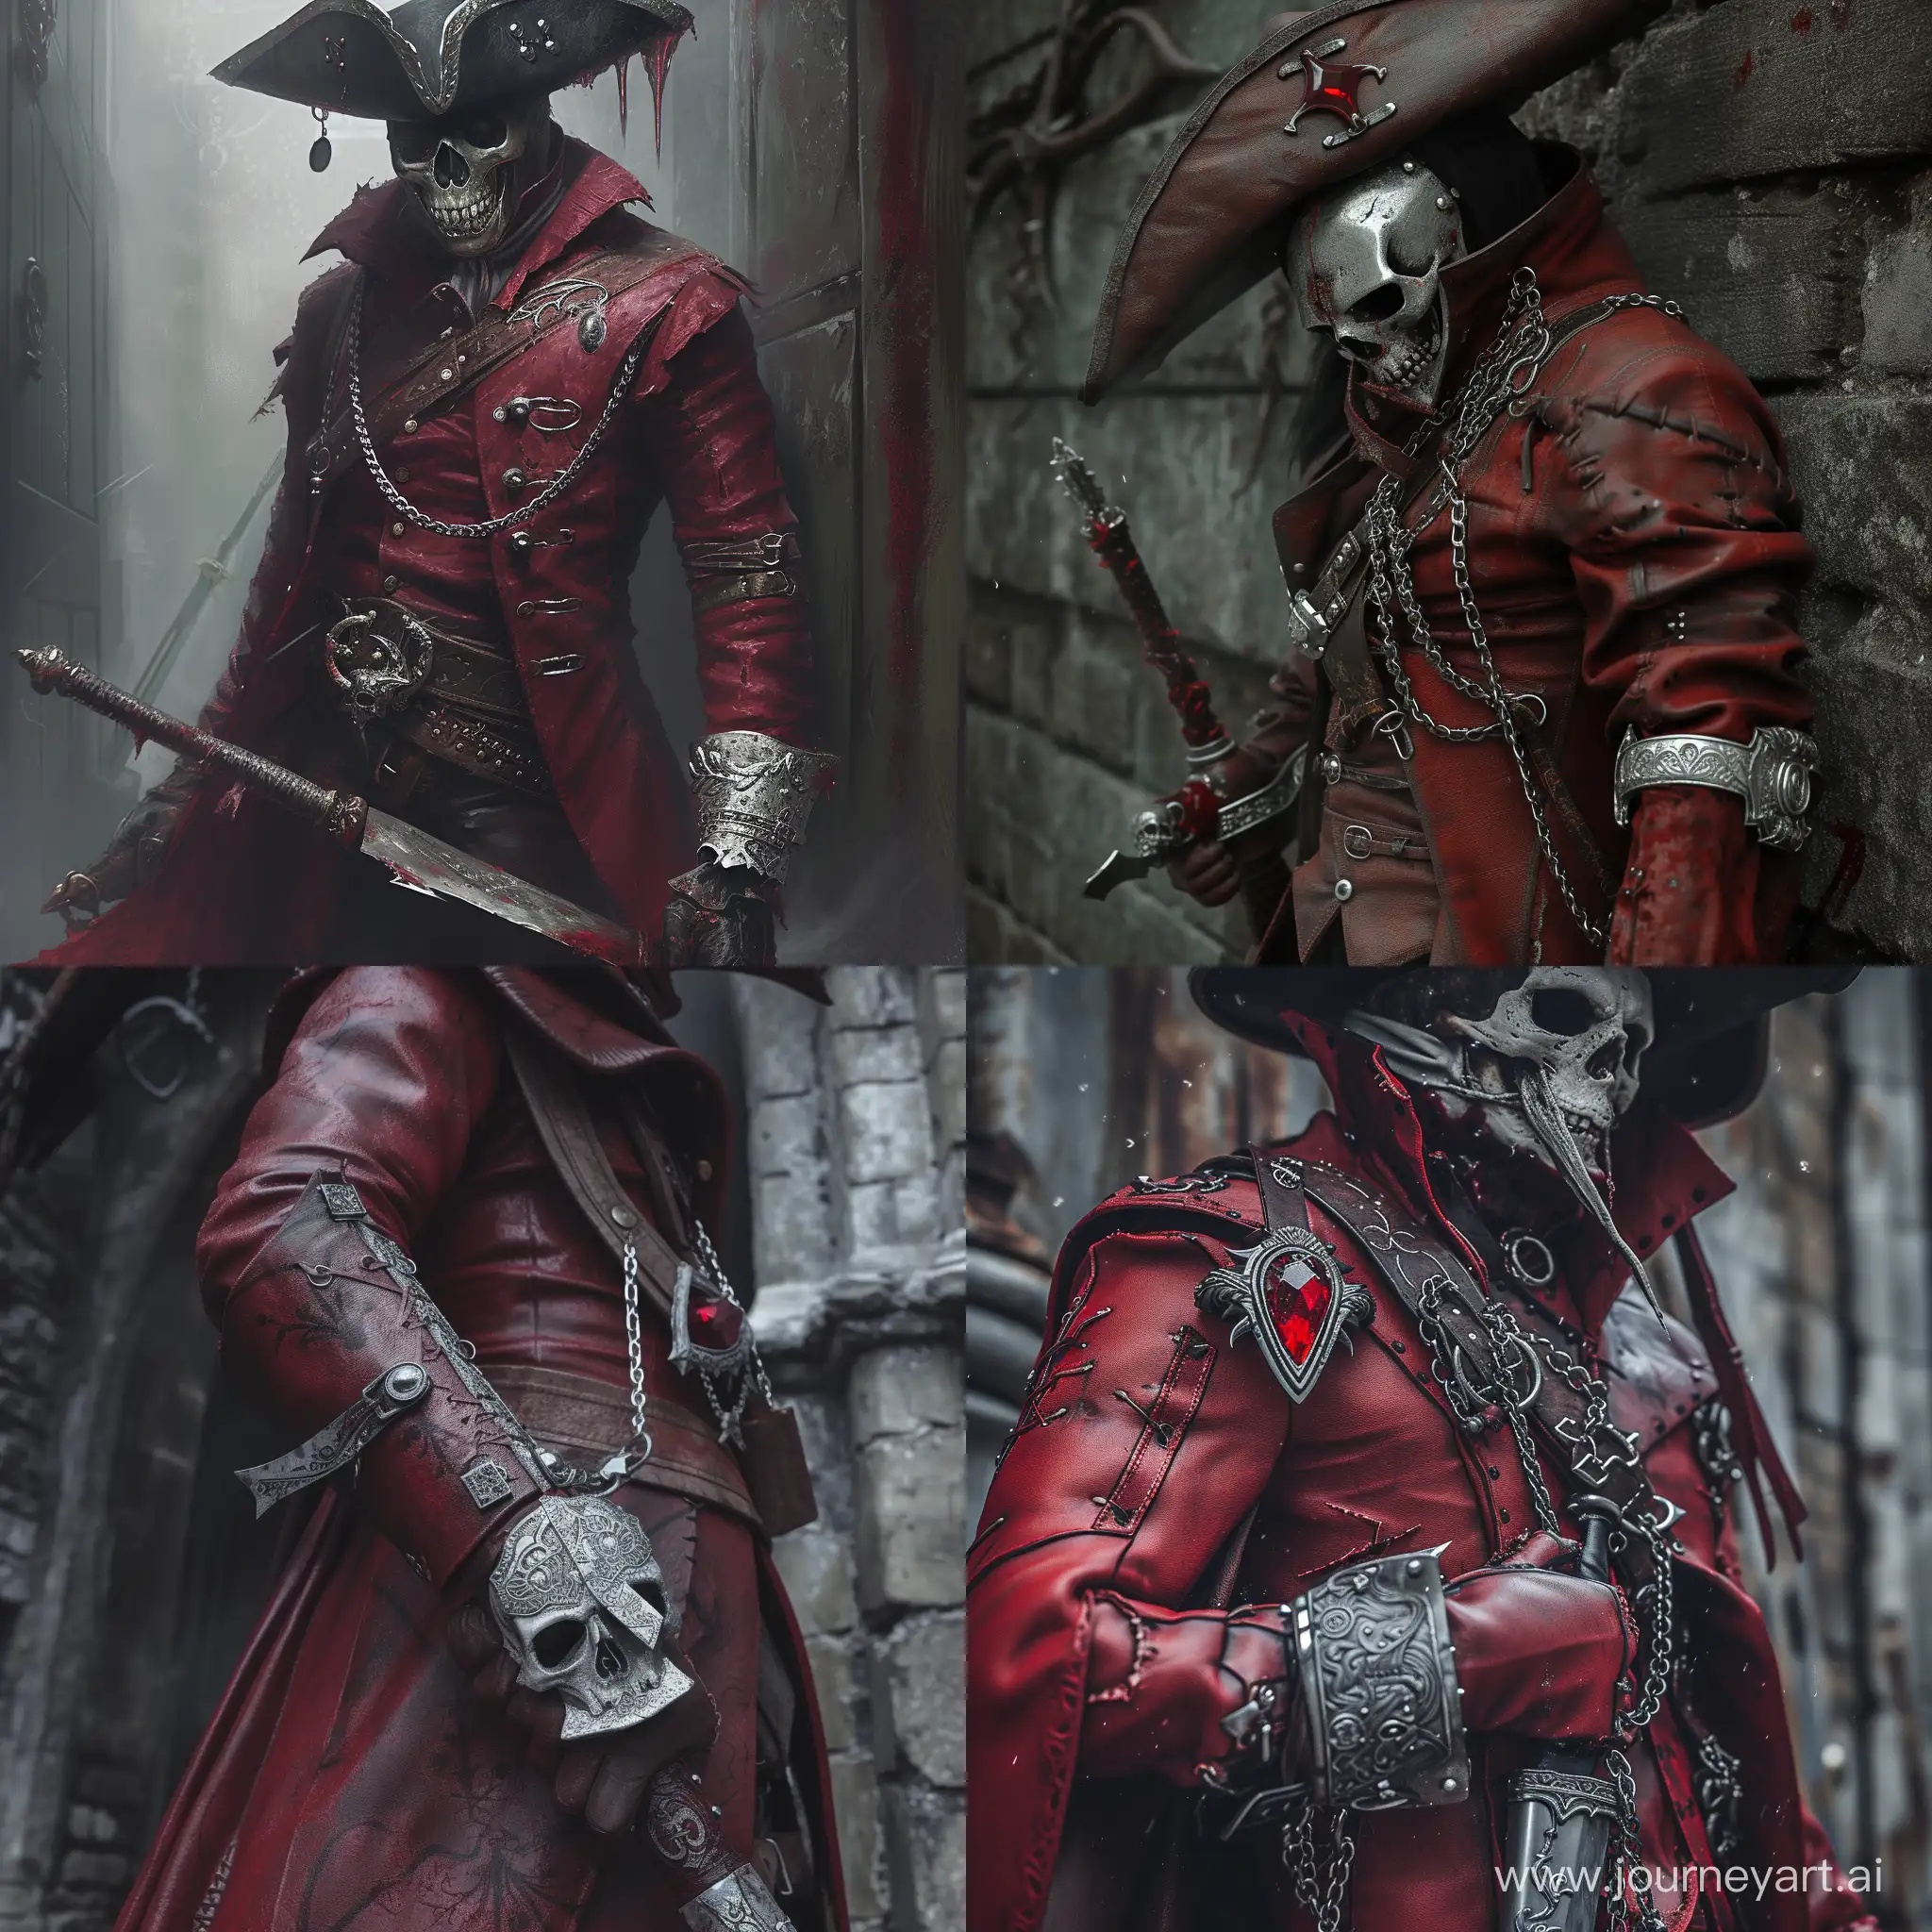 On the haunted shores of Cainhurst, the Bloodbound Marauder emerges from the mist. The crimson leather coat billows as the hunter's silver half skull mask sends shivers through the ancient castle's corridors, where echoes of lost souls linger, A leather wrist cuff with occult engravings, a silver chain with a crimson crystal pendant, and a tricorn hat, wielding an ornate cutlass with a serrated edge, echoing tales of vampiric prowess, dark fantasy style, bloodborne style, gritty, detailed, half body shot, dark, blood on weapons